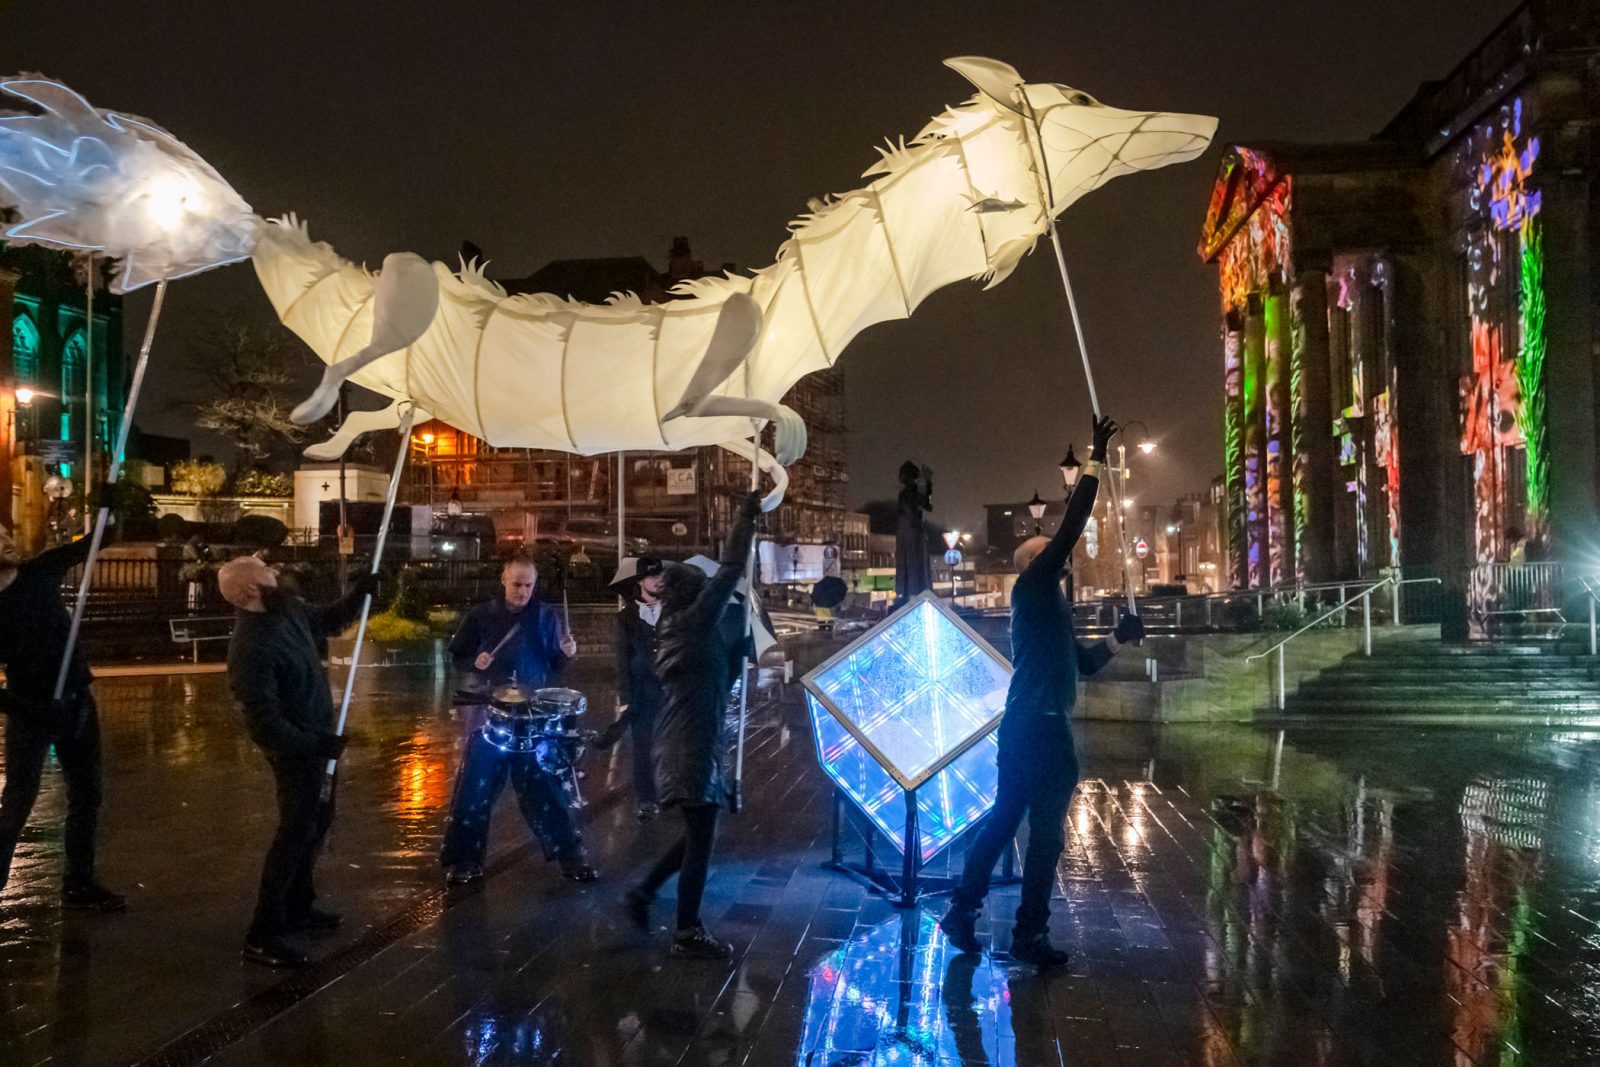 The breathtaking illuminated earth art installation is coming to Oldham this month, The Manc